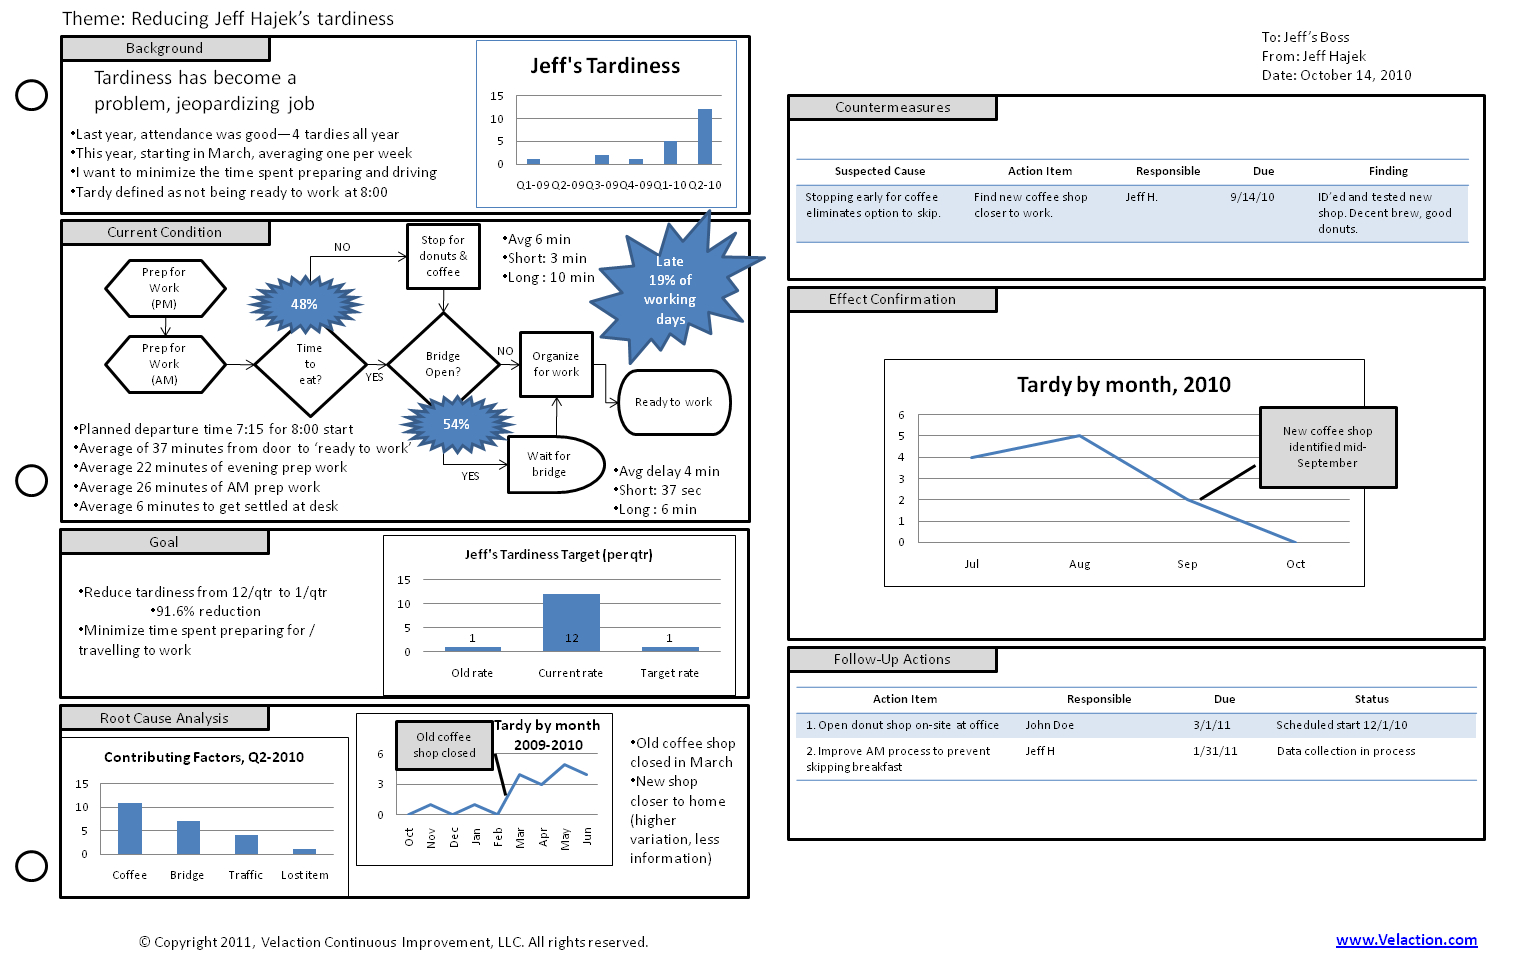 A3 Report Template Xls ] – A3 Report Template For Lean A3 Intended For 8D Report Template Xls